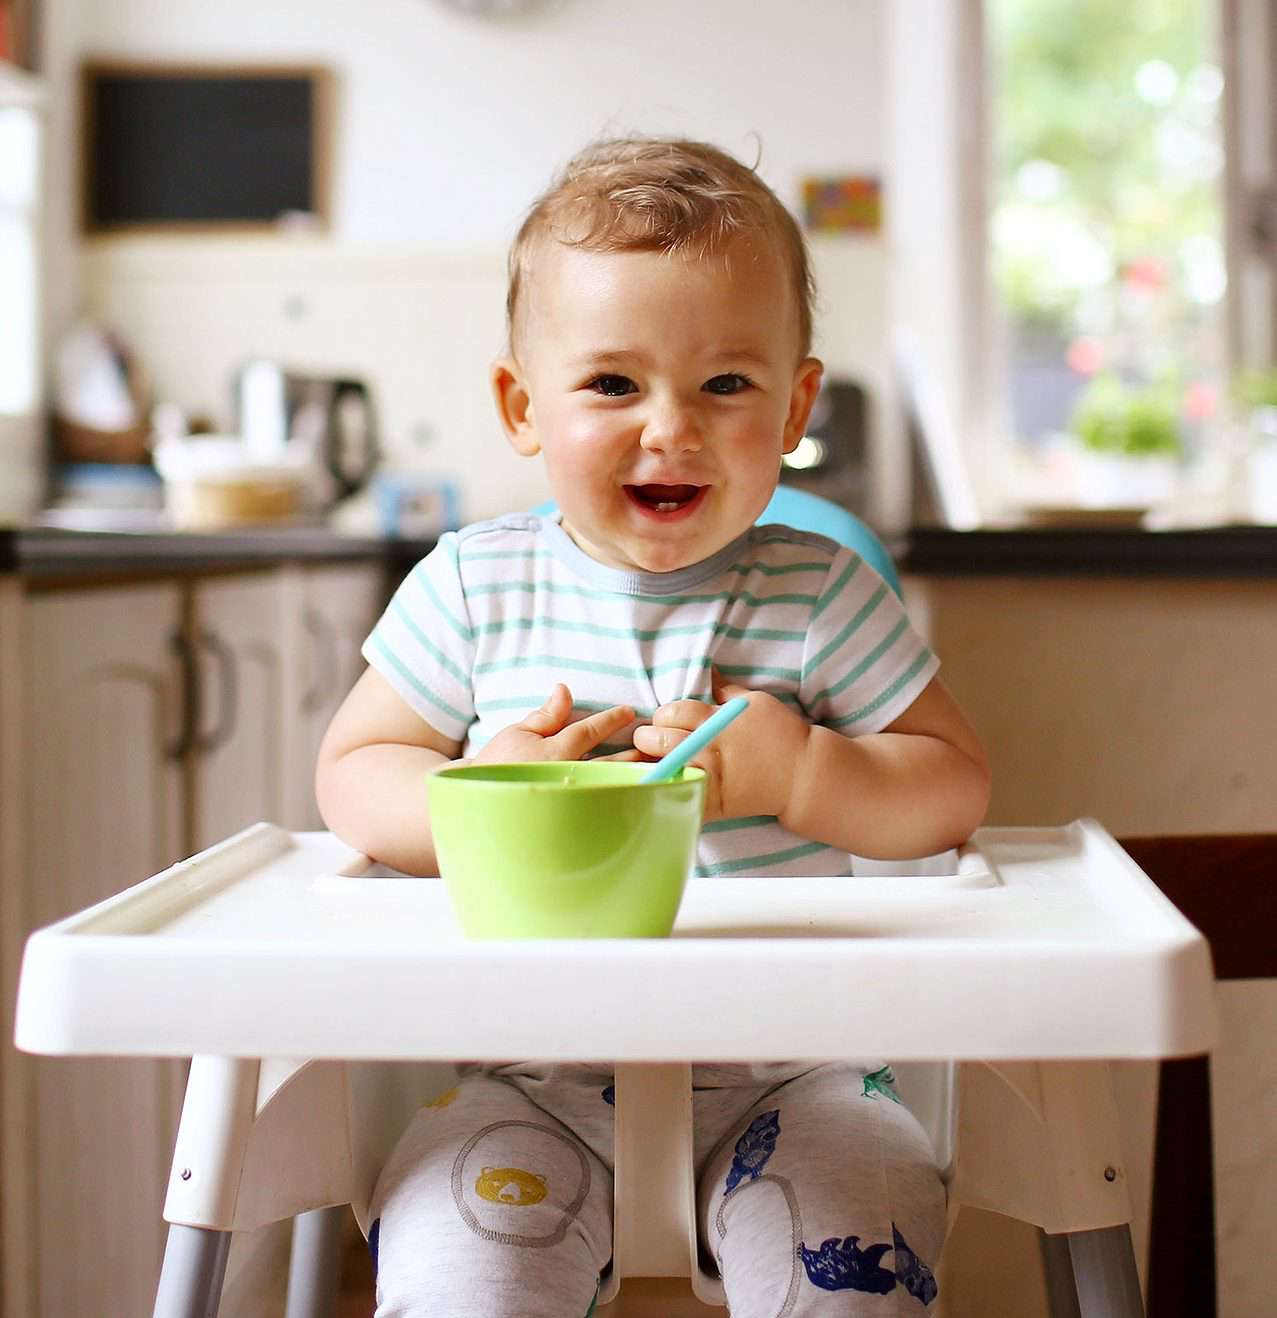 A 1 year old boy smiling on his high chair